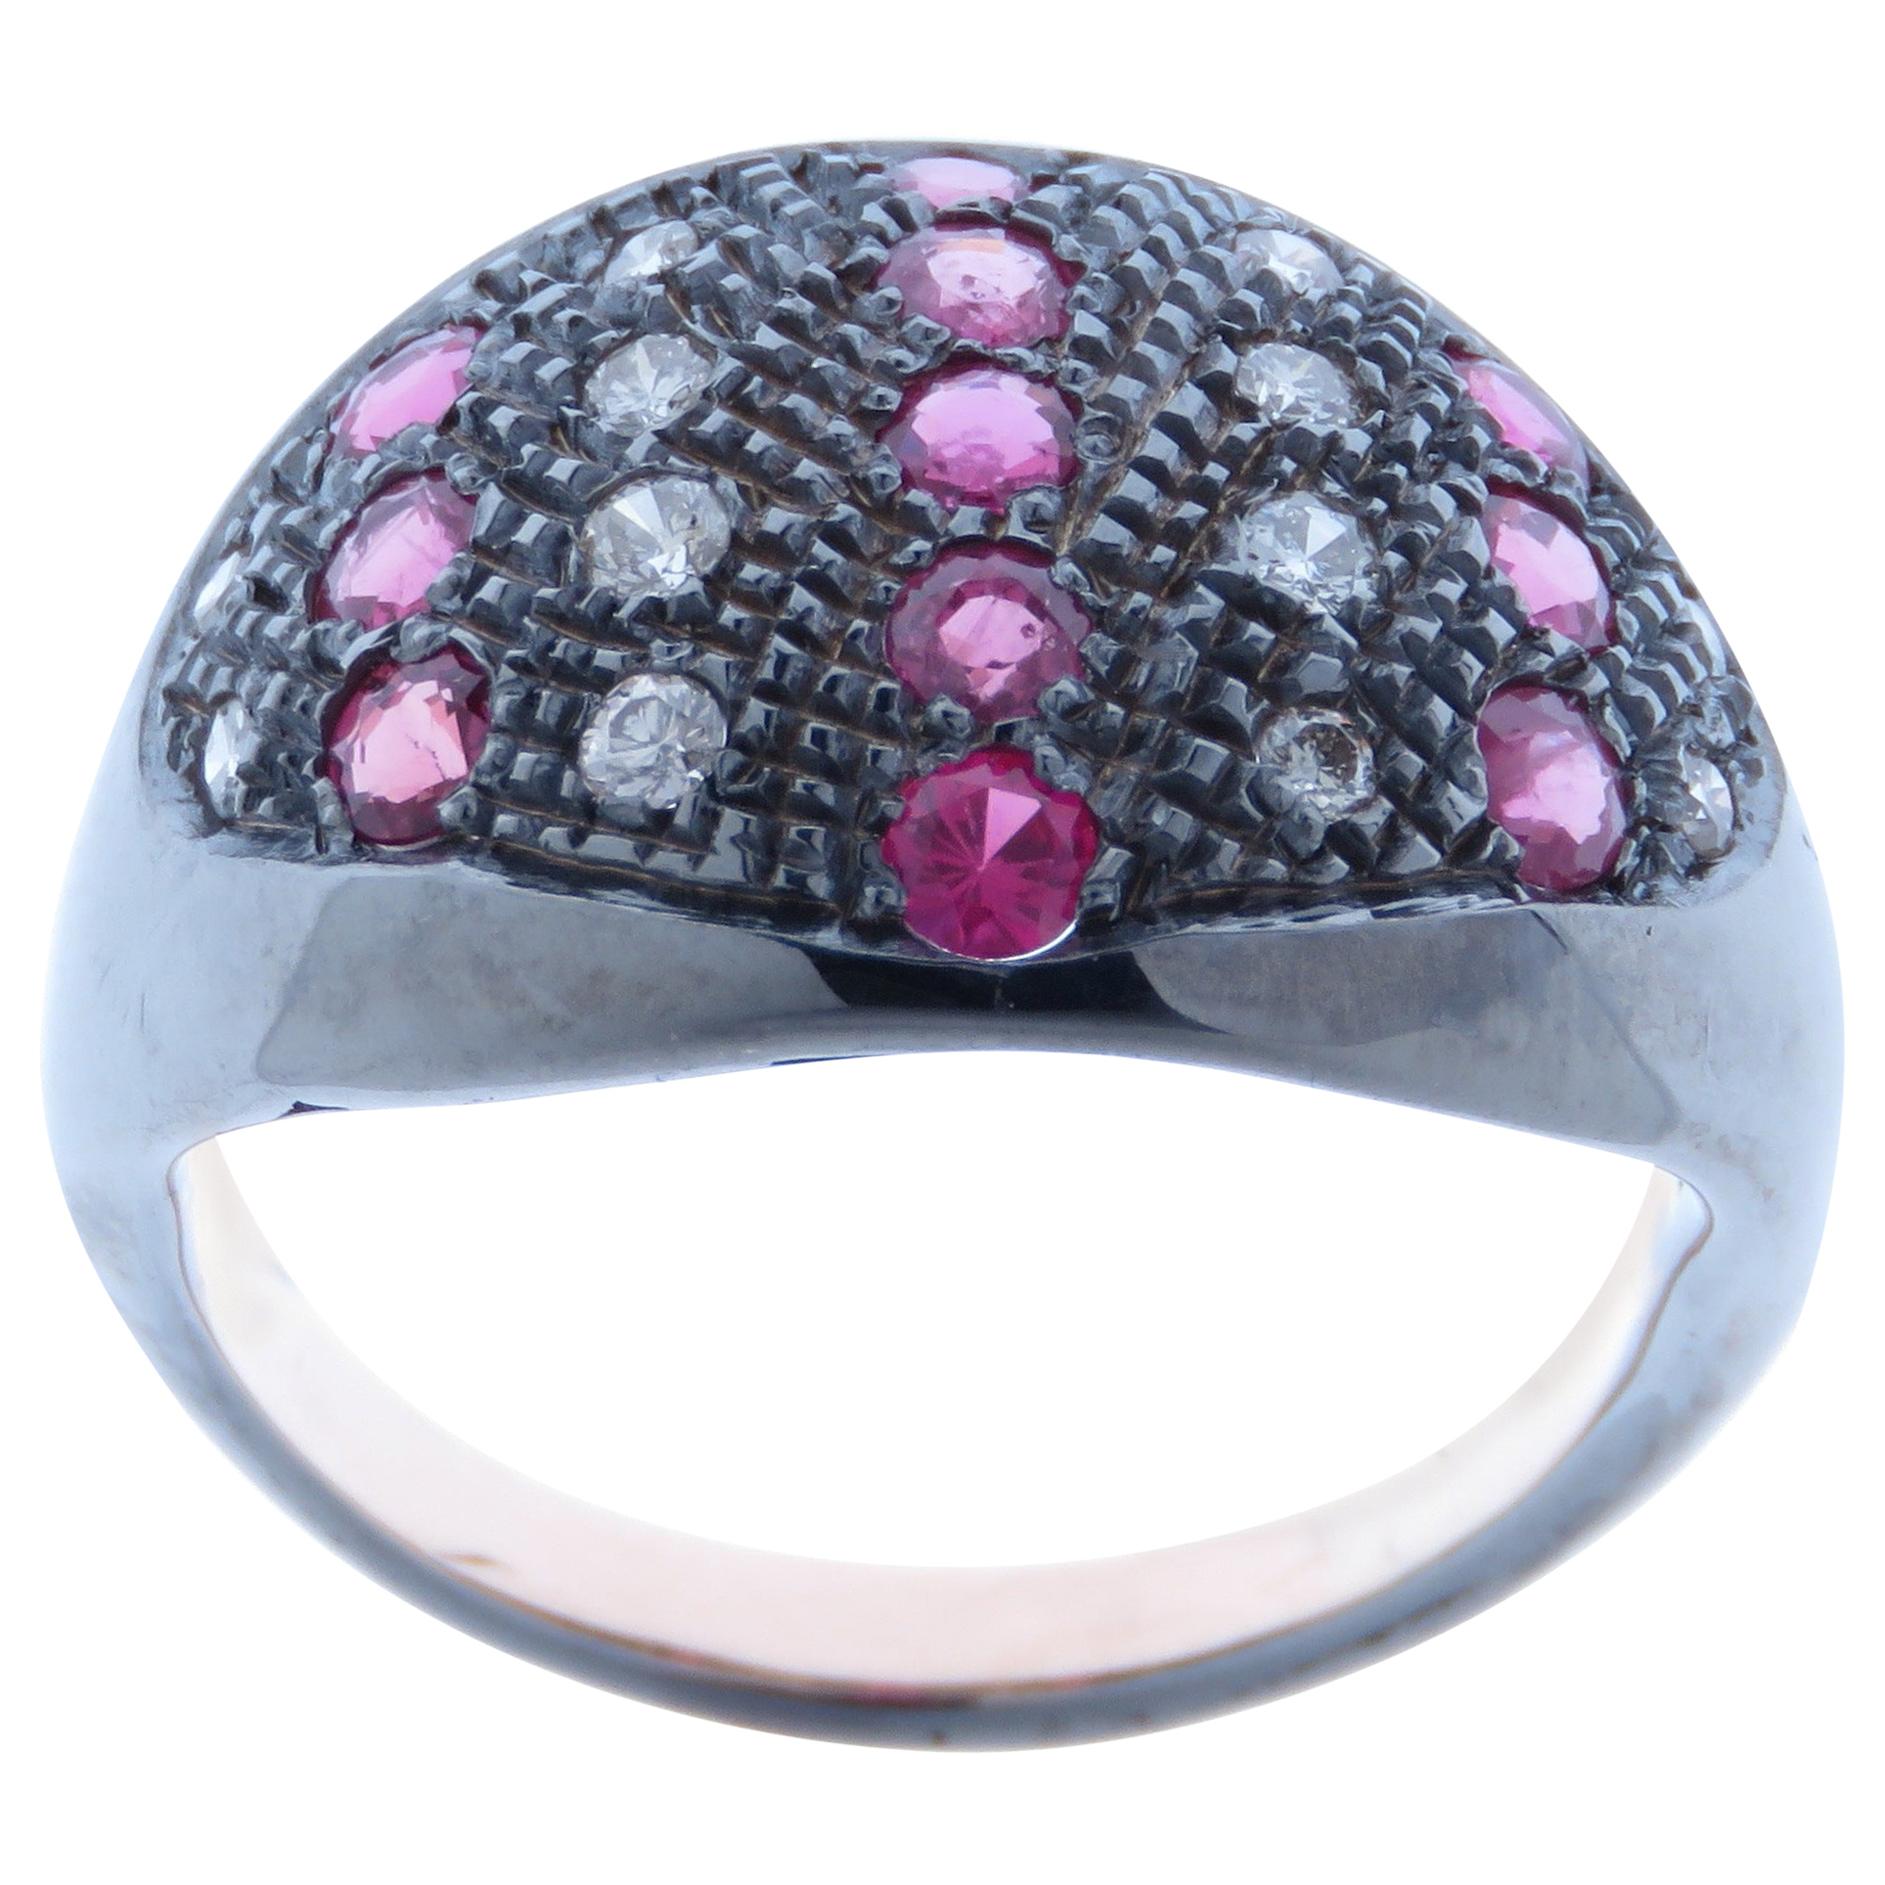 Diamonds Rubies Dome Ring Handcrafted in Italy by Botta Gioielli For Sale